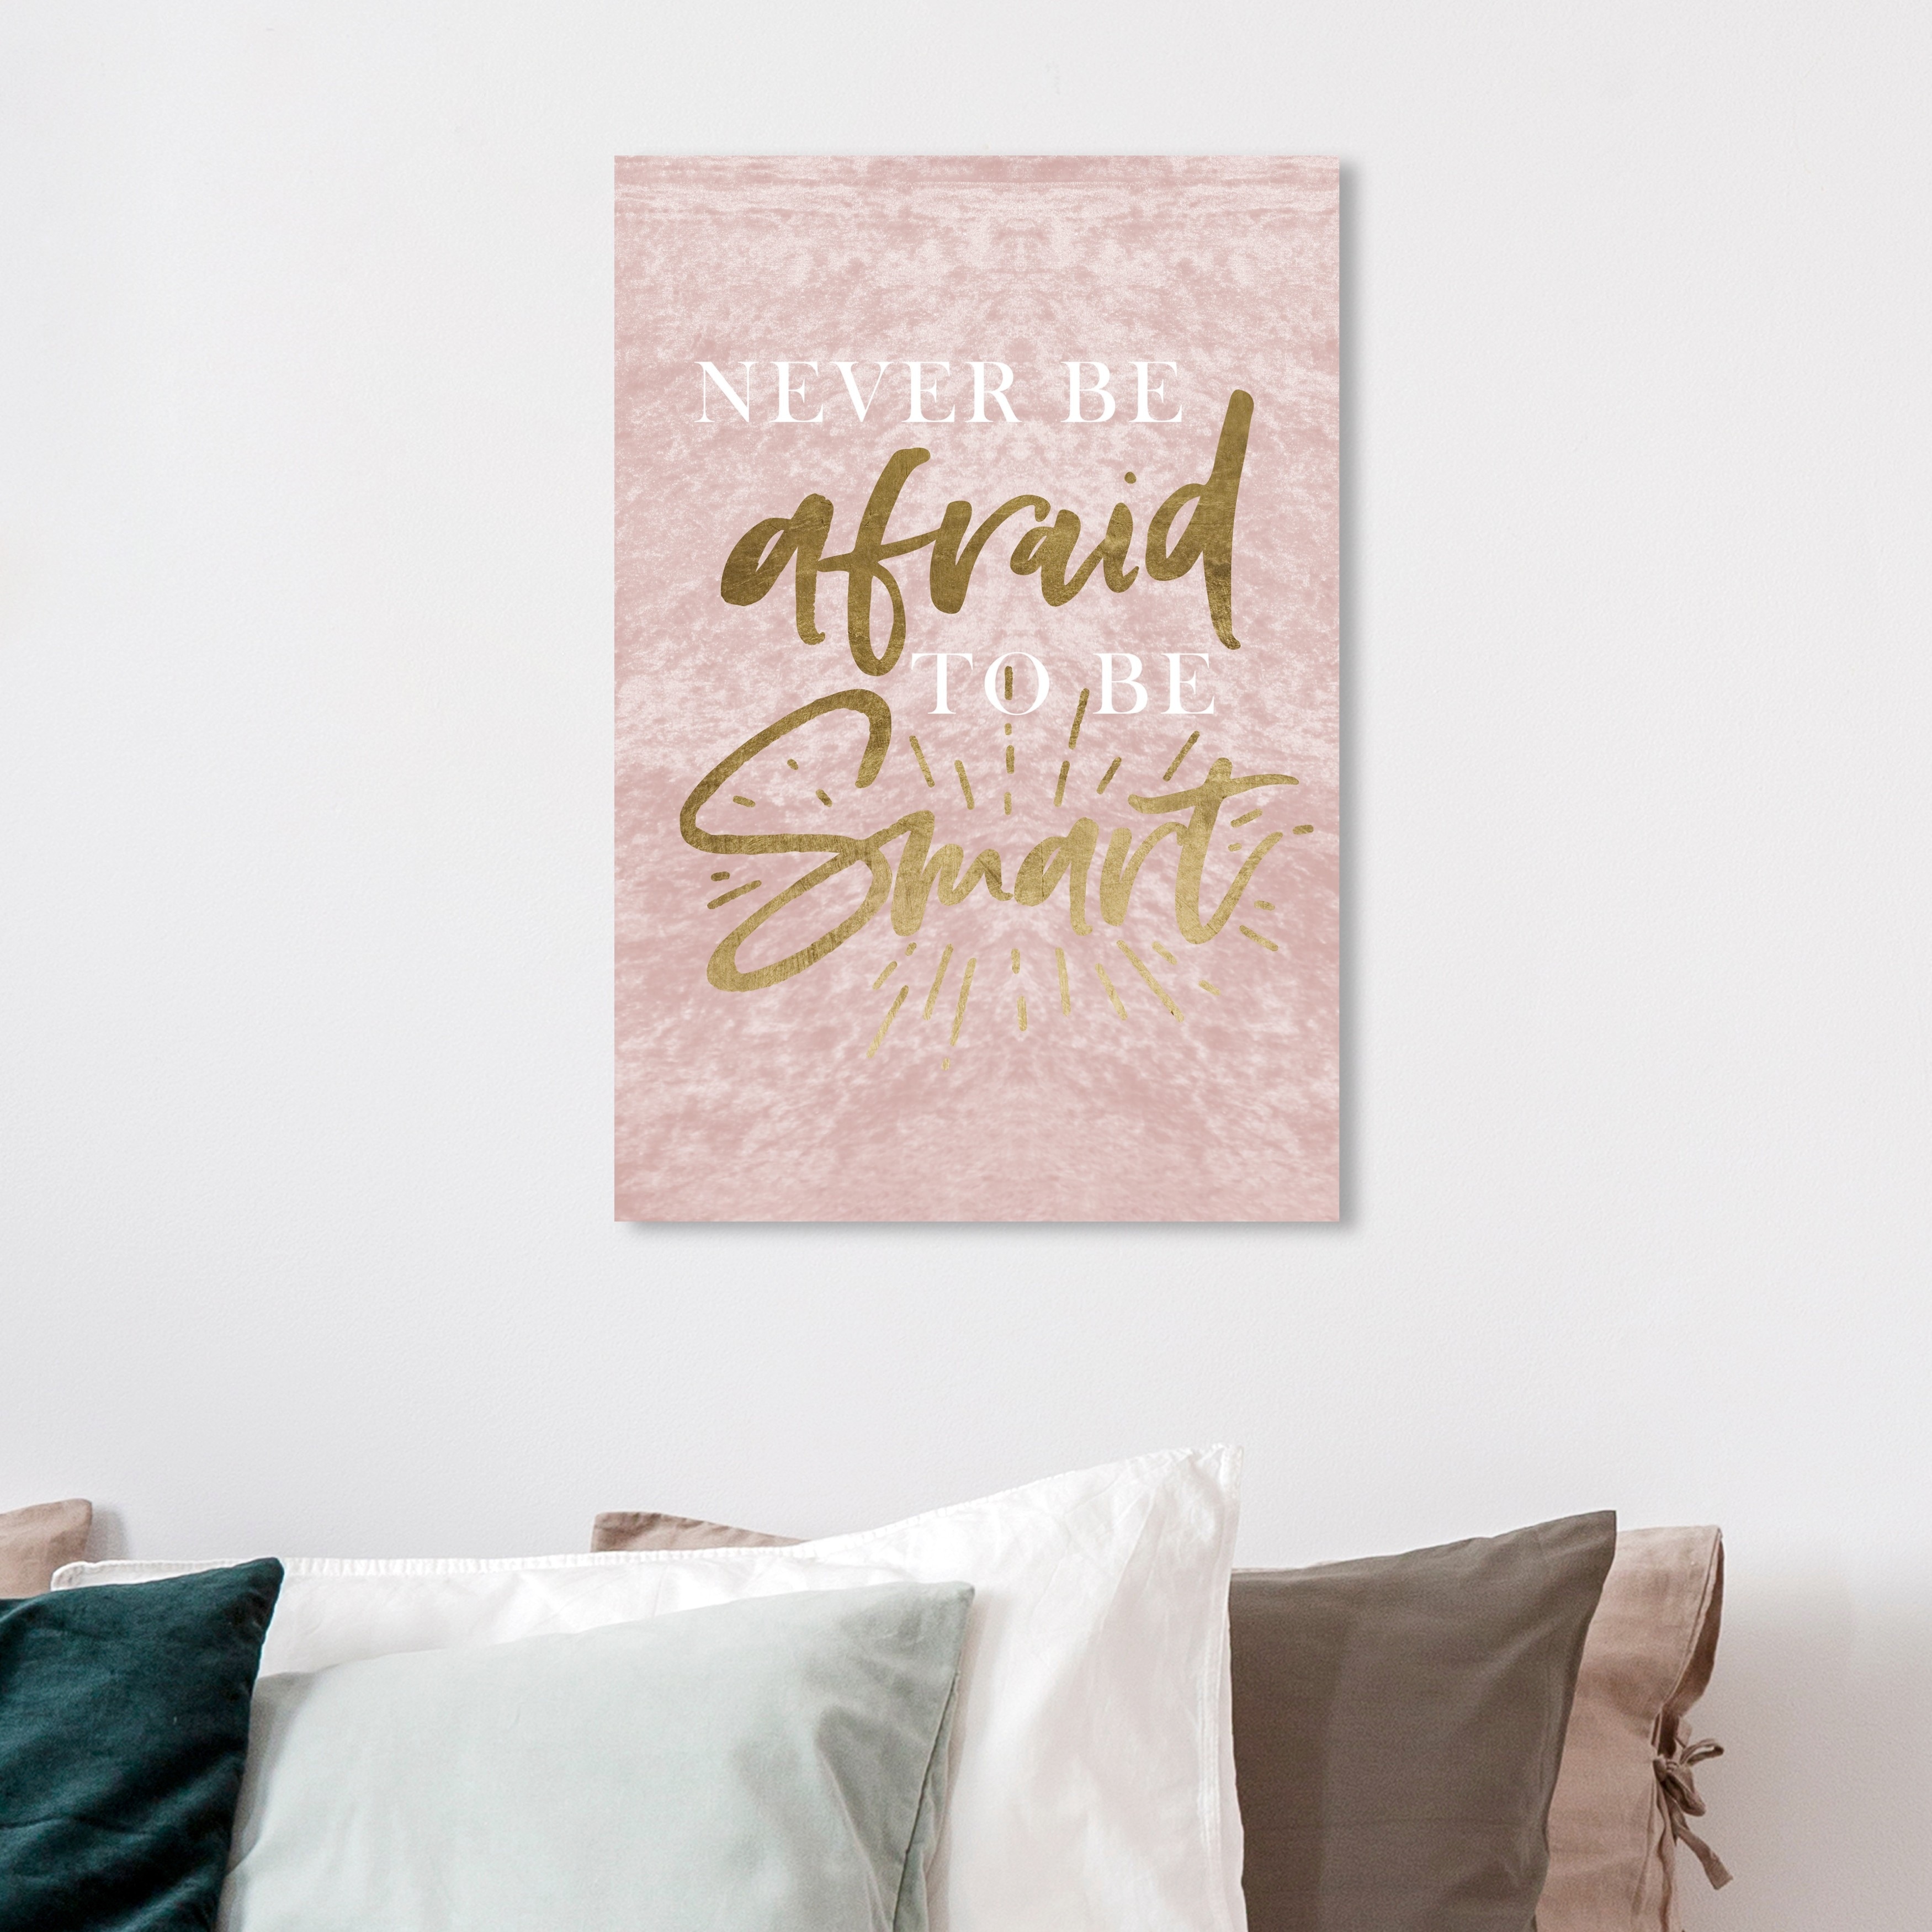 Studio Motivational Bed Typography and Quotes Canvas Wall Quotes \'Never Be - 31291167 Gold & Pink, Smart\' Print - Afraid Wynwood Bath be - Beyond to Art